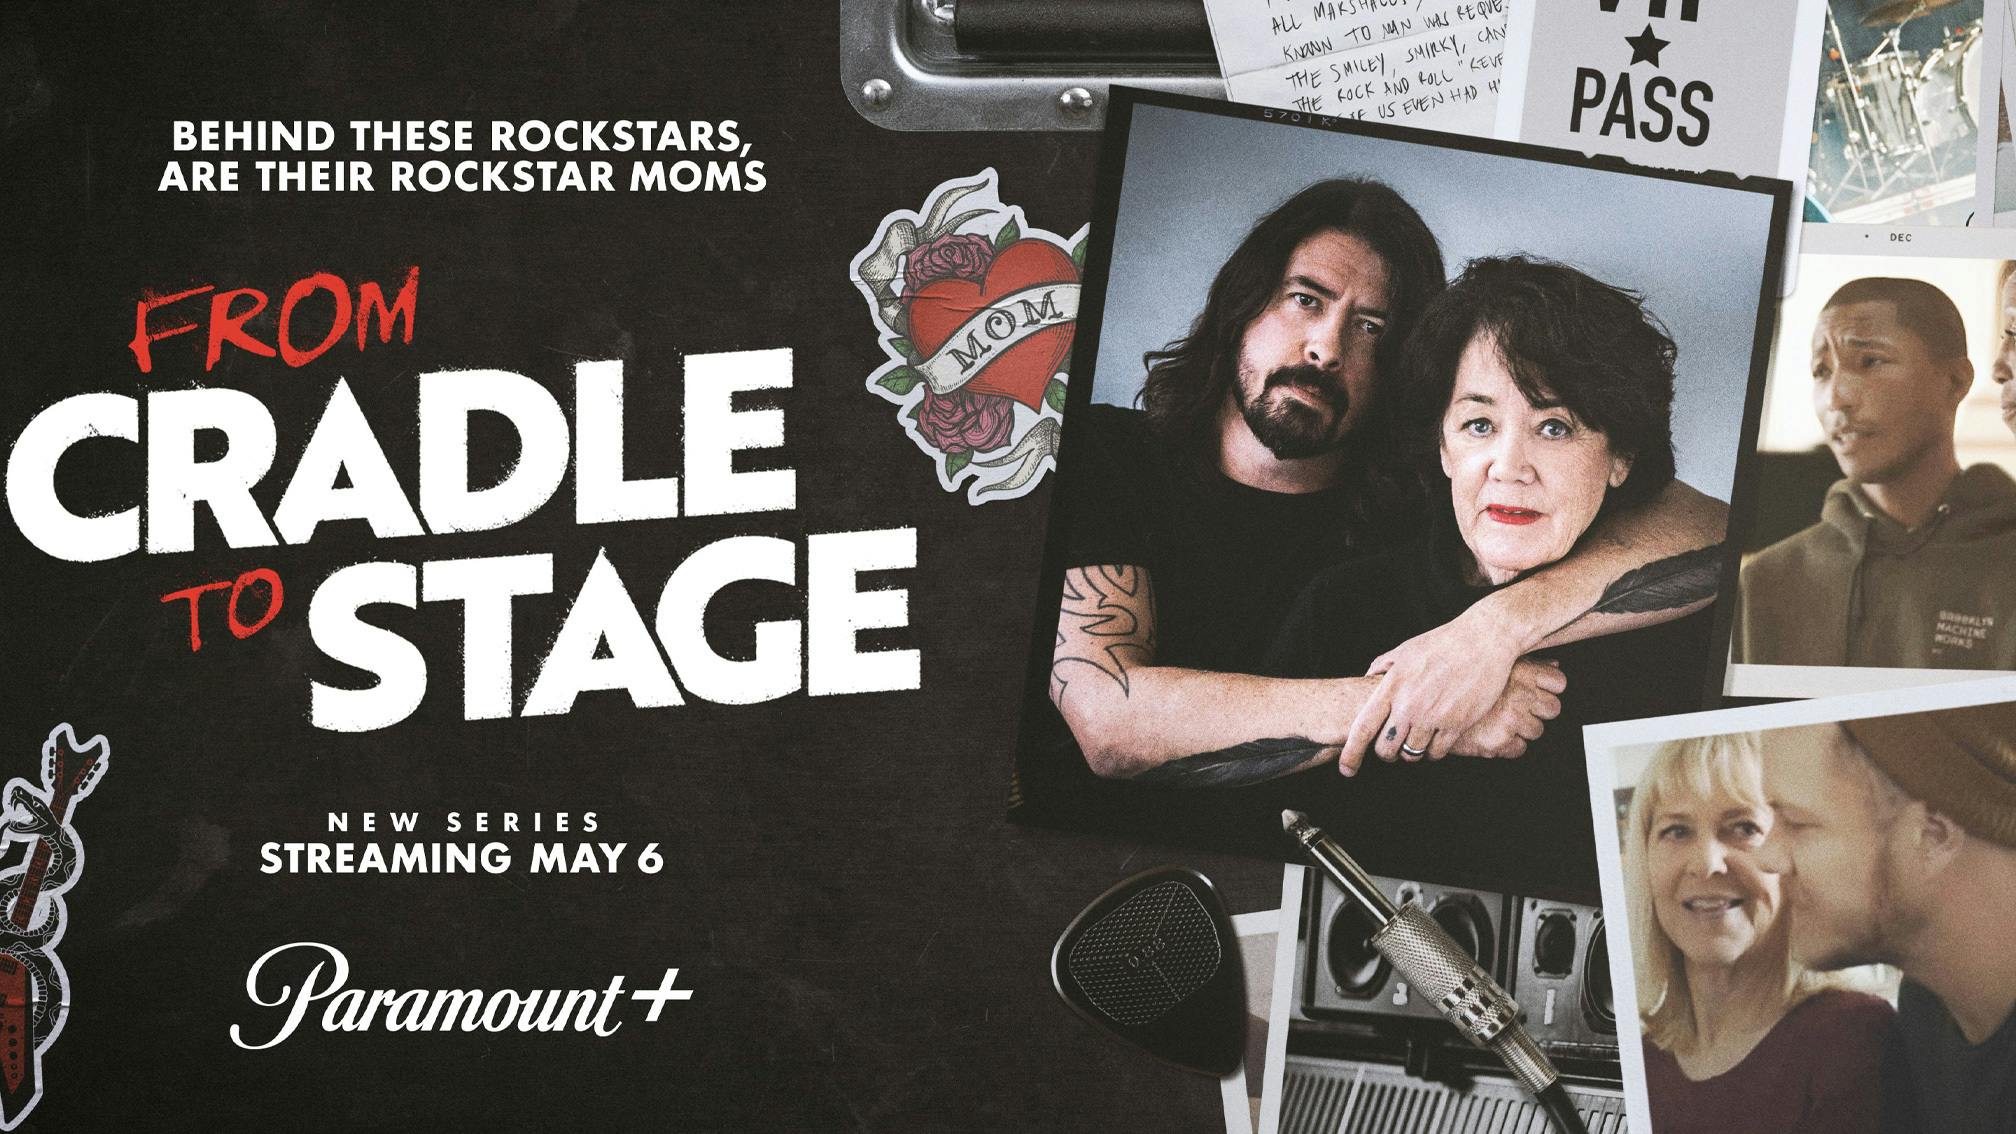 Dave Grohl announces new TV series with his mother Virginia, From Cradle To Stage